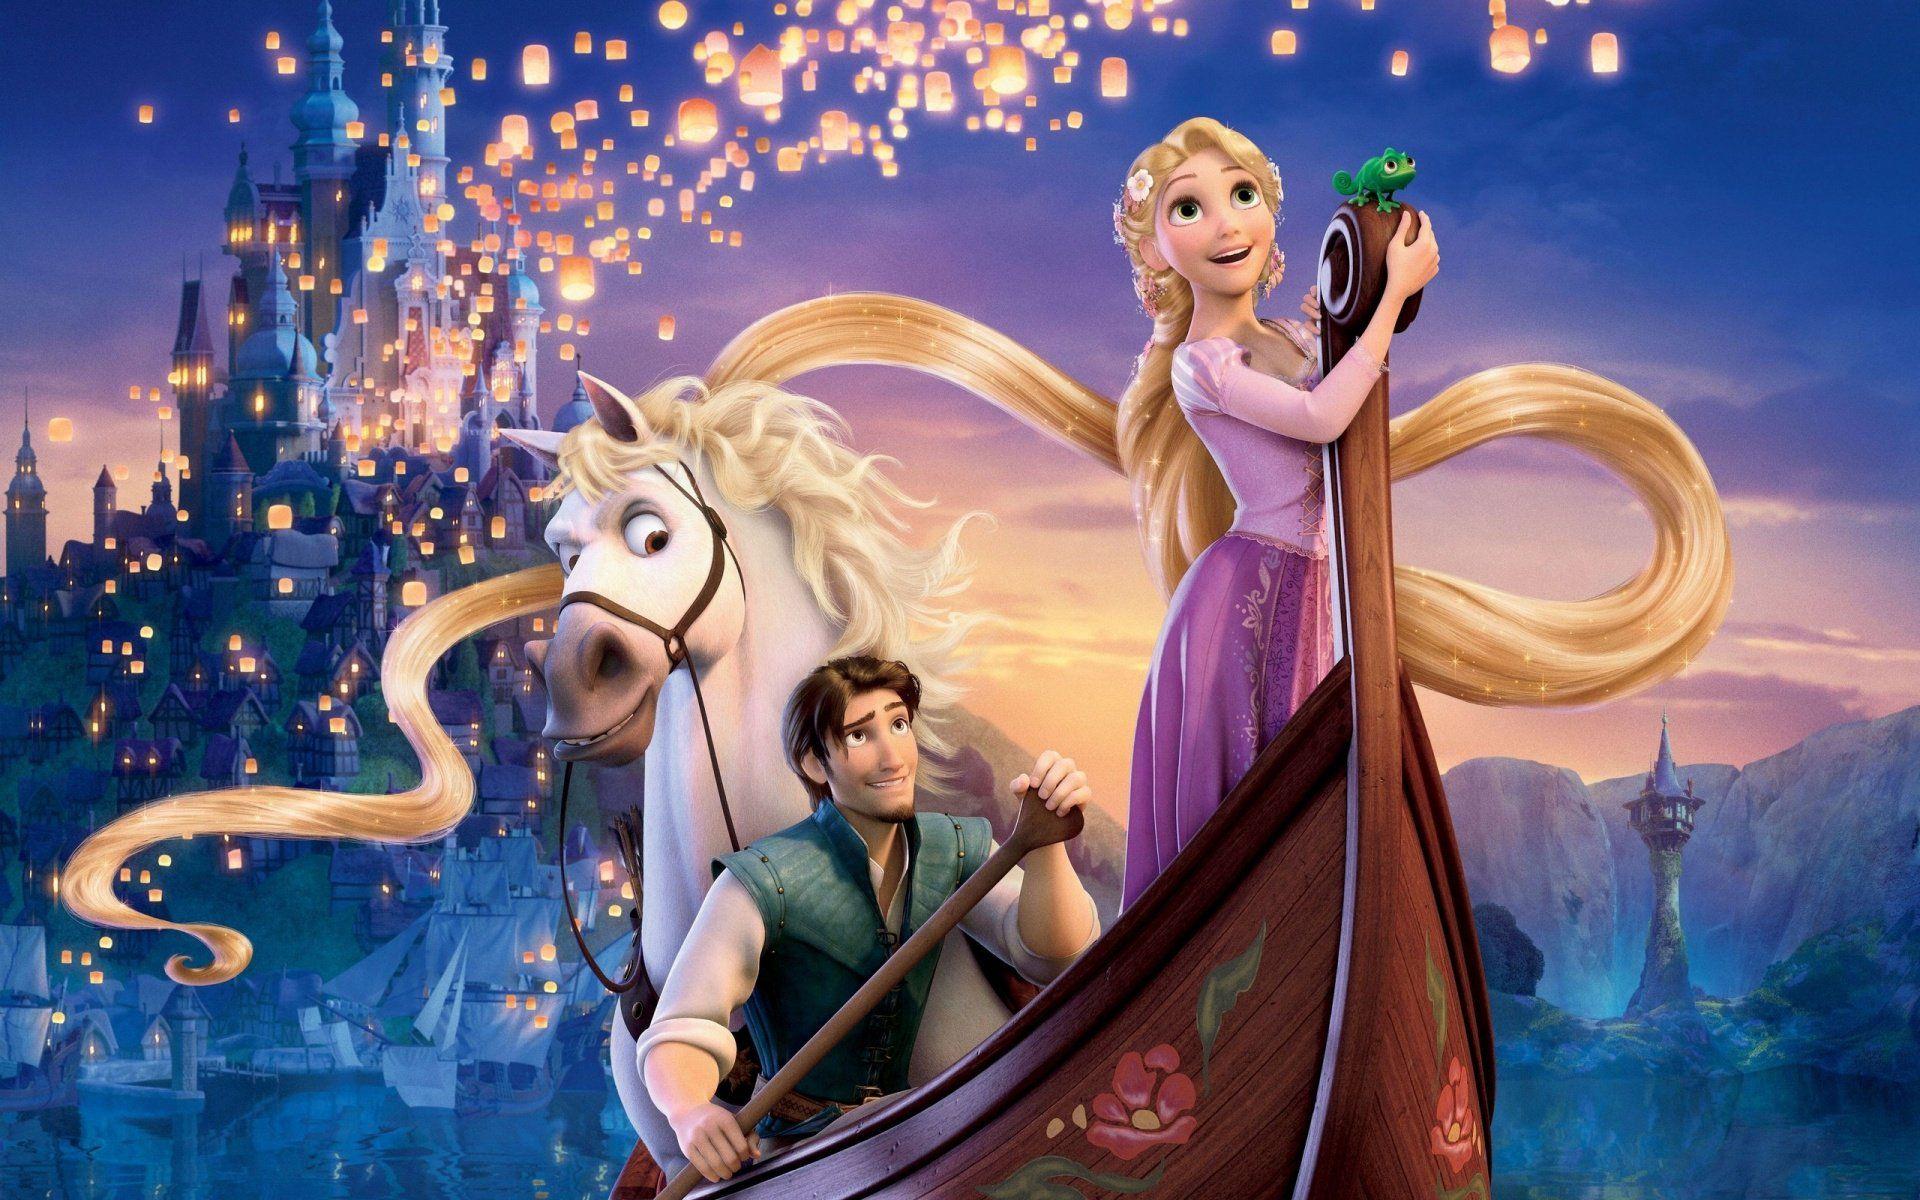 Tangled characters Rapunzel & Flynn Rider